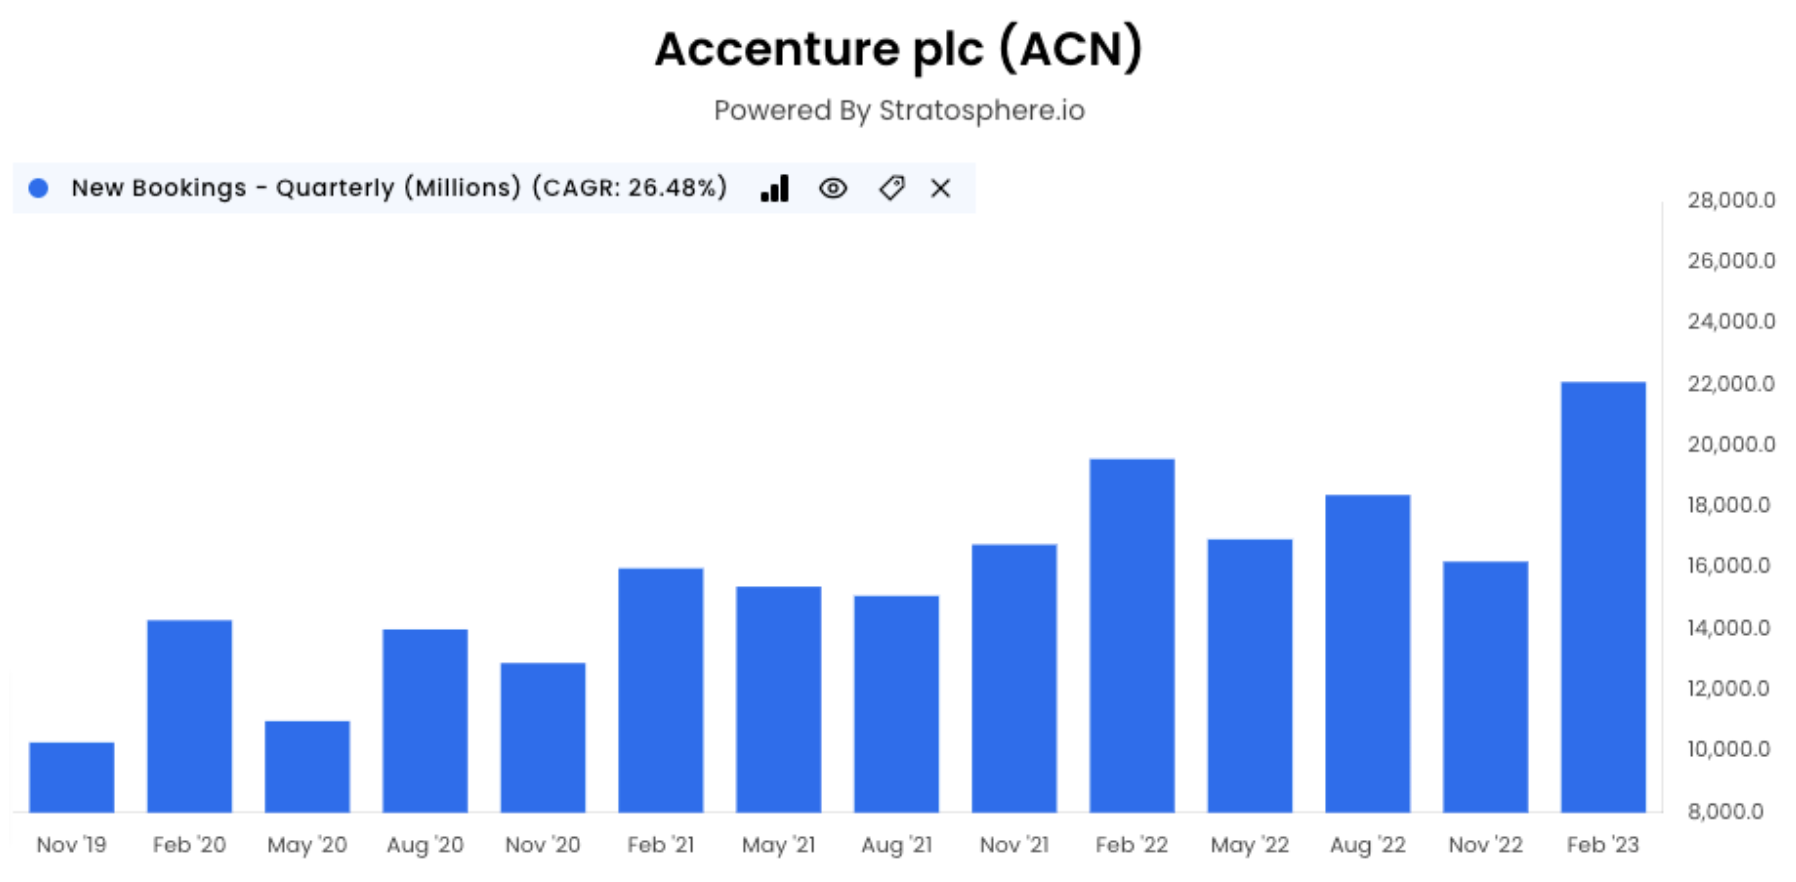 Accenture new bookings graph